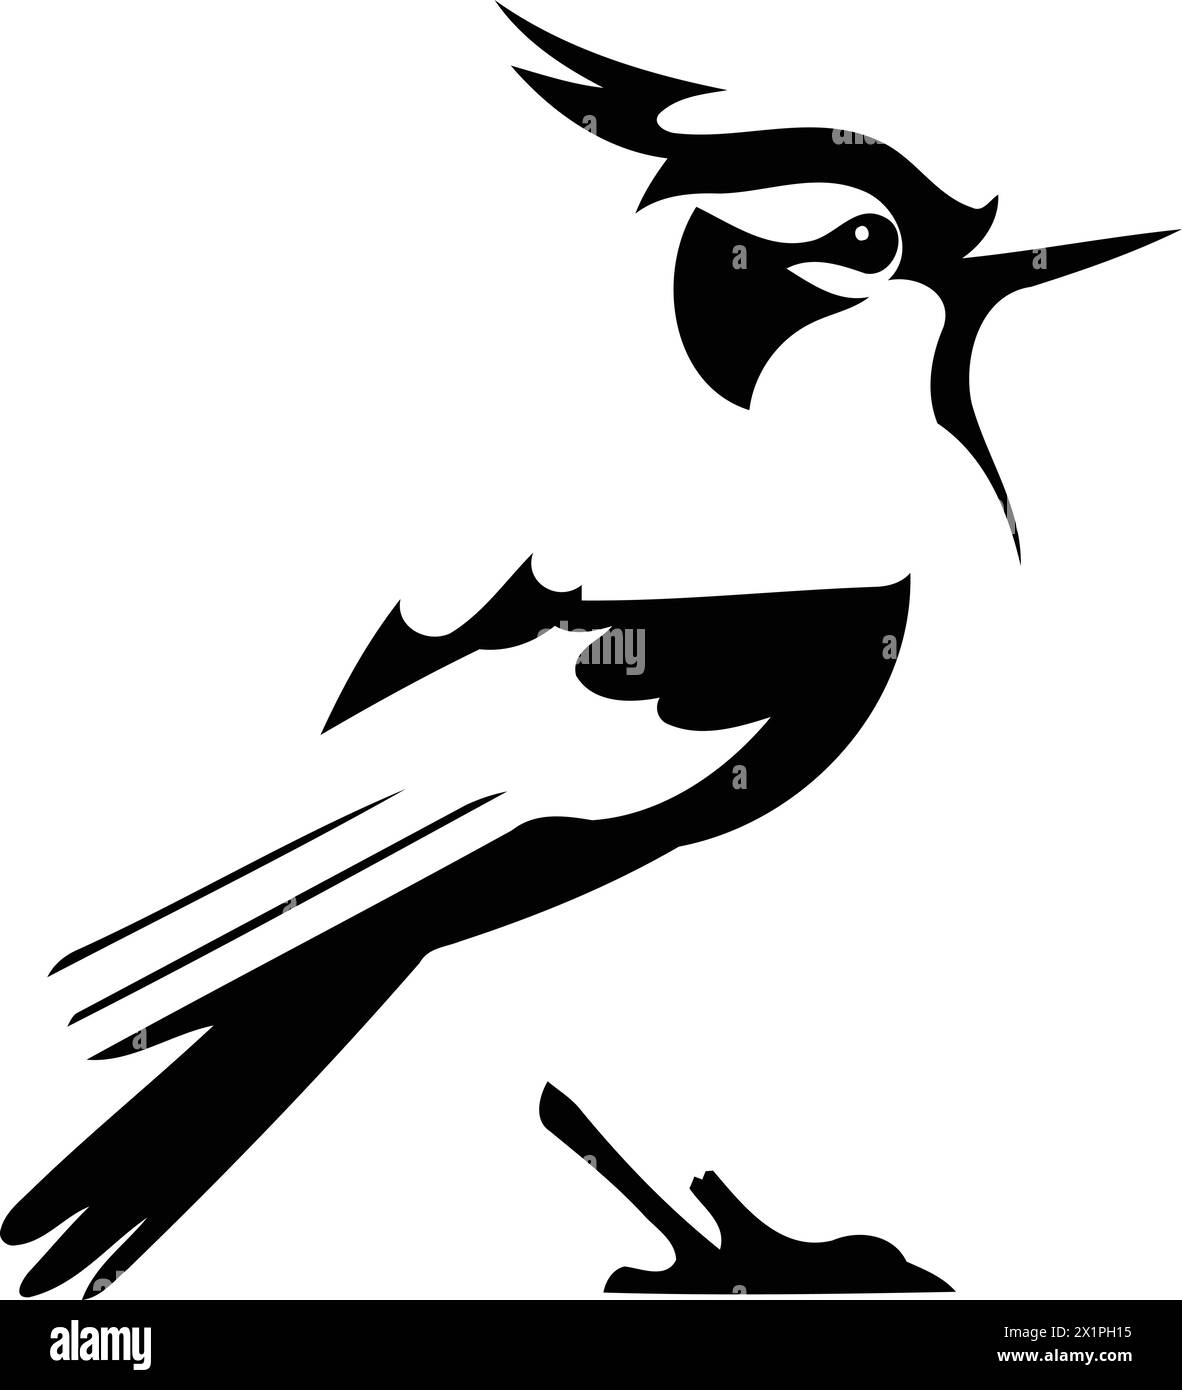 Blue jay bird vector Illustration isolated on a white background. Stock Vector